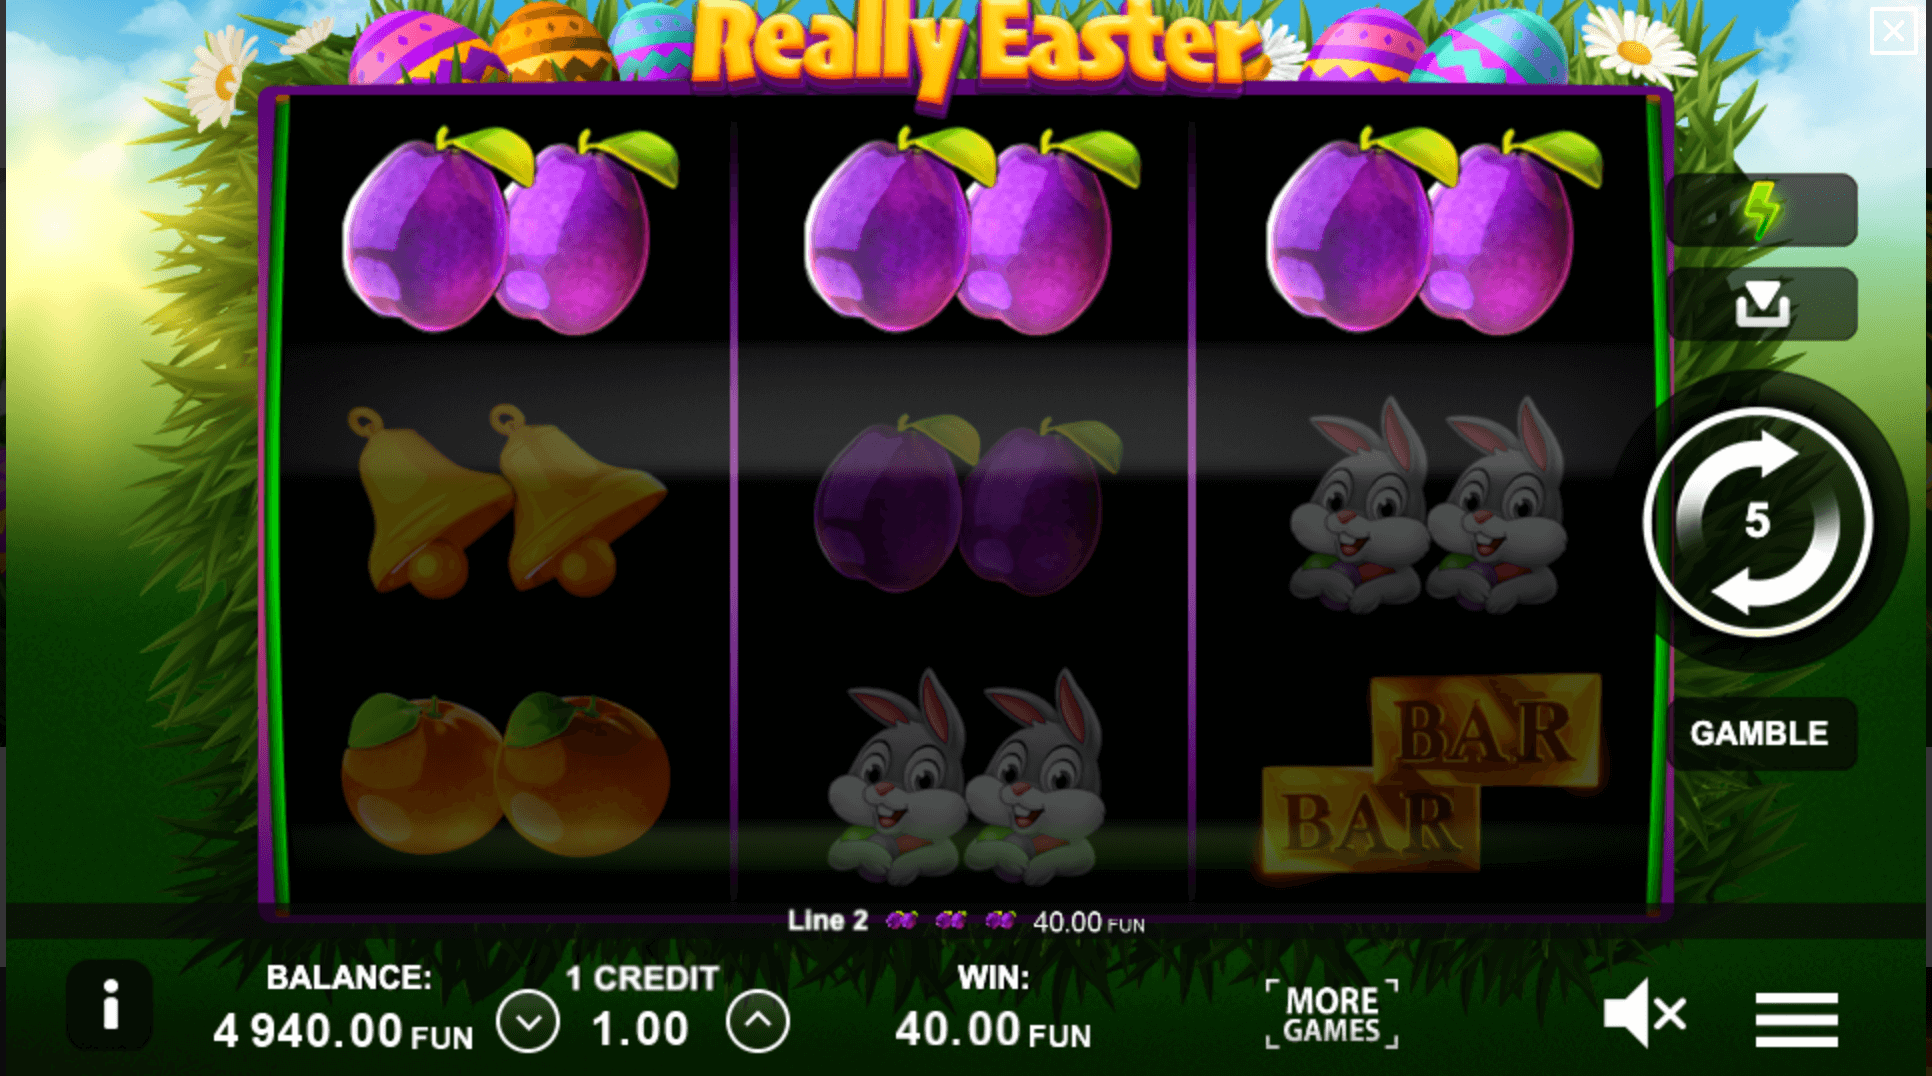 Really Easter Spel proces